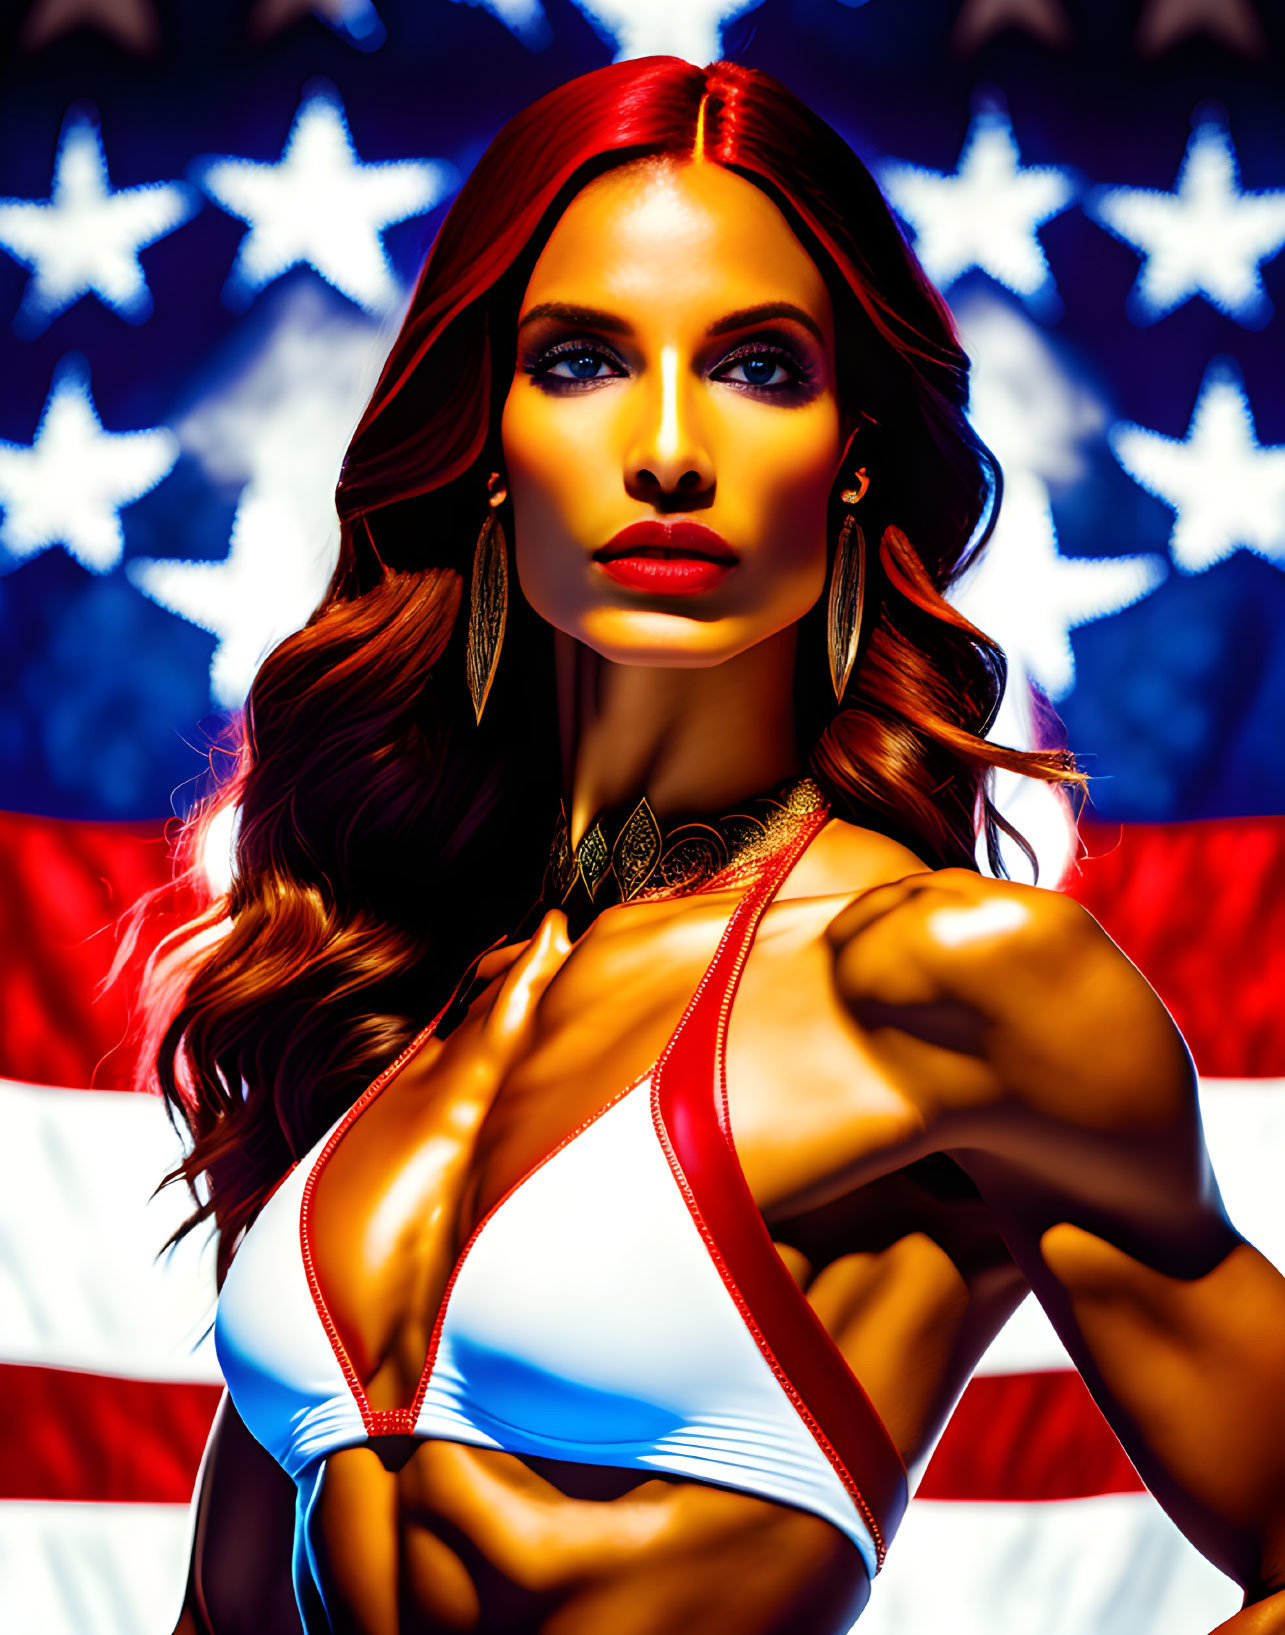 Stylized portrait of woman with flowing hair in patriotic attire